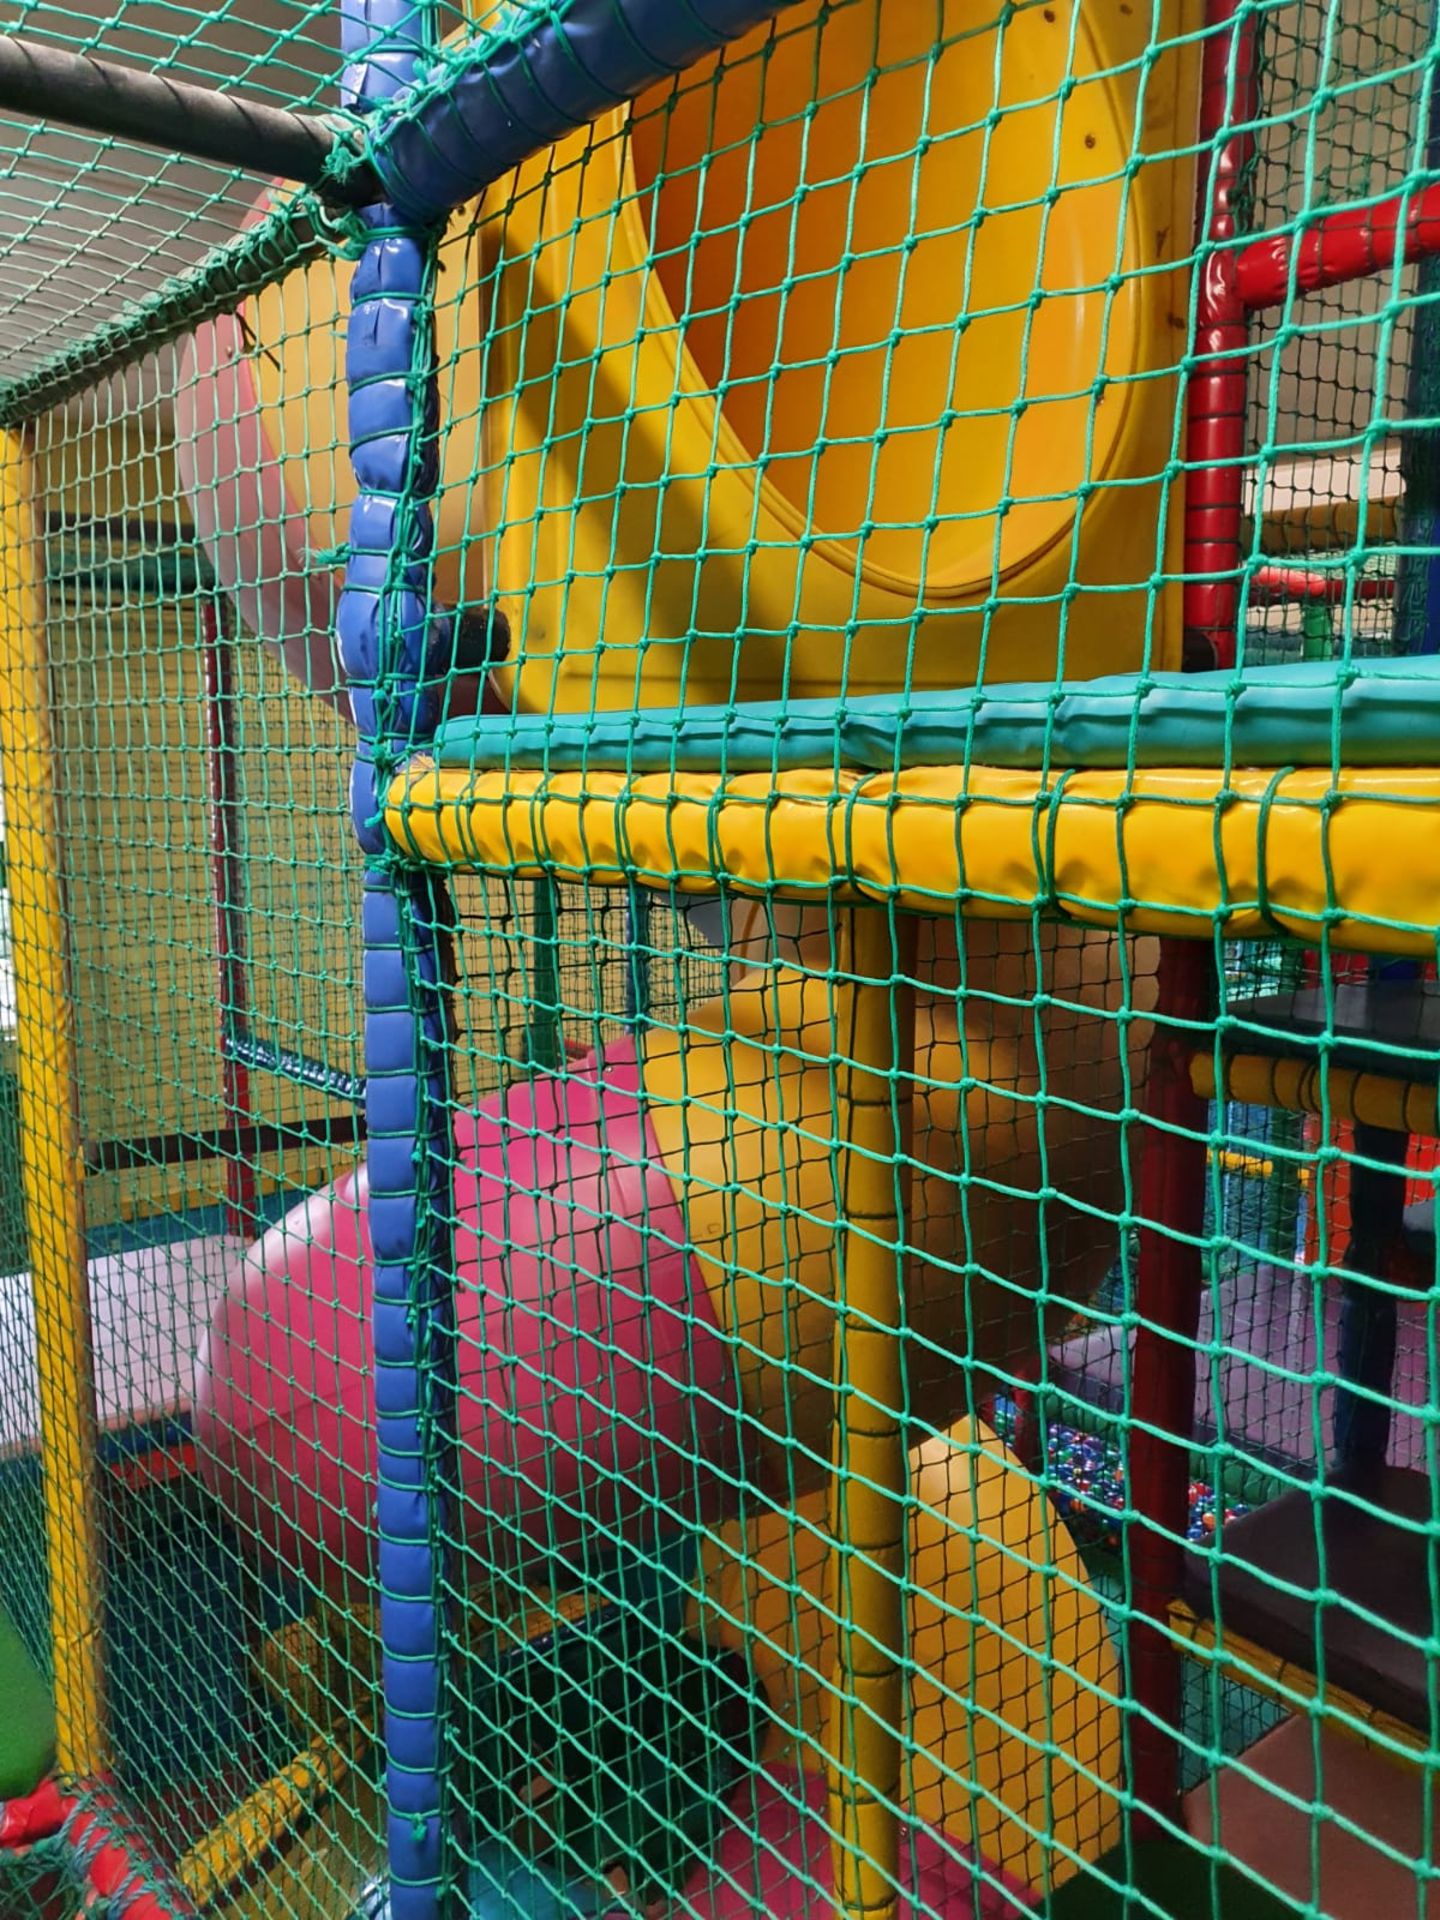 Bramleys Big Adventure Playground - Giant Action-Packed Playcentre With Slides, Zip Line Swings, - Image 46 of 99